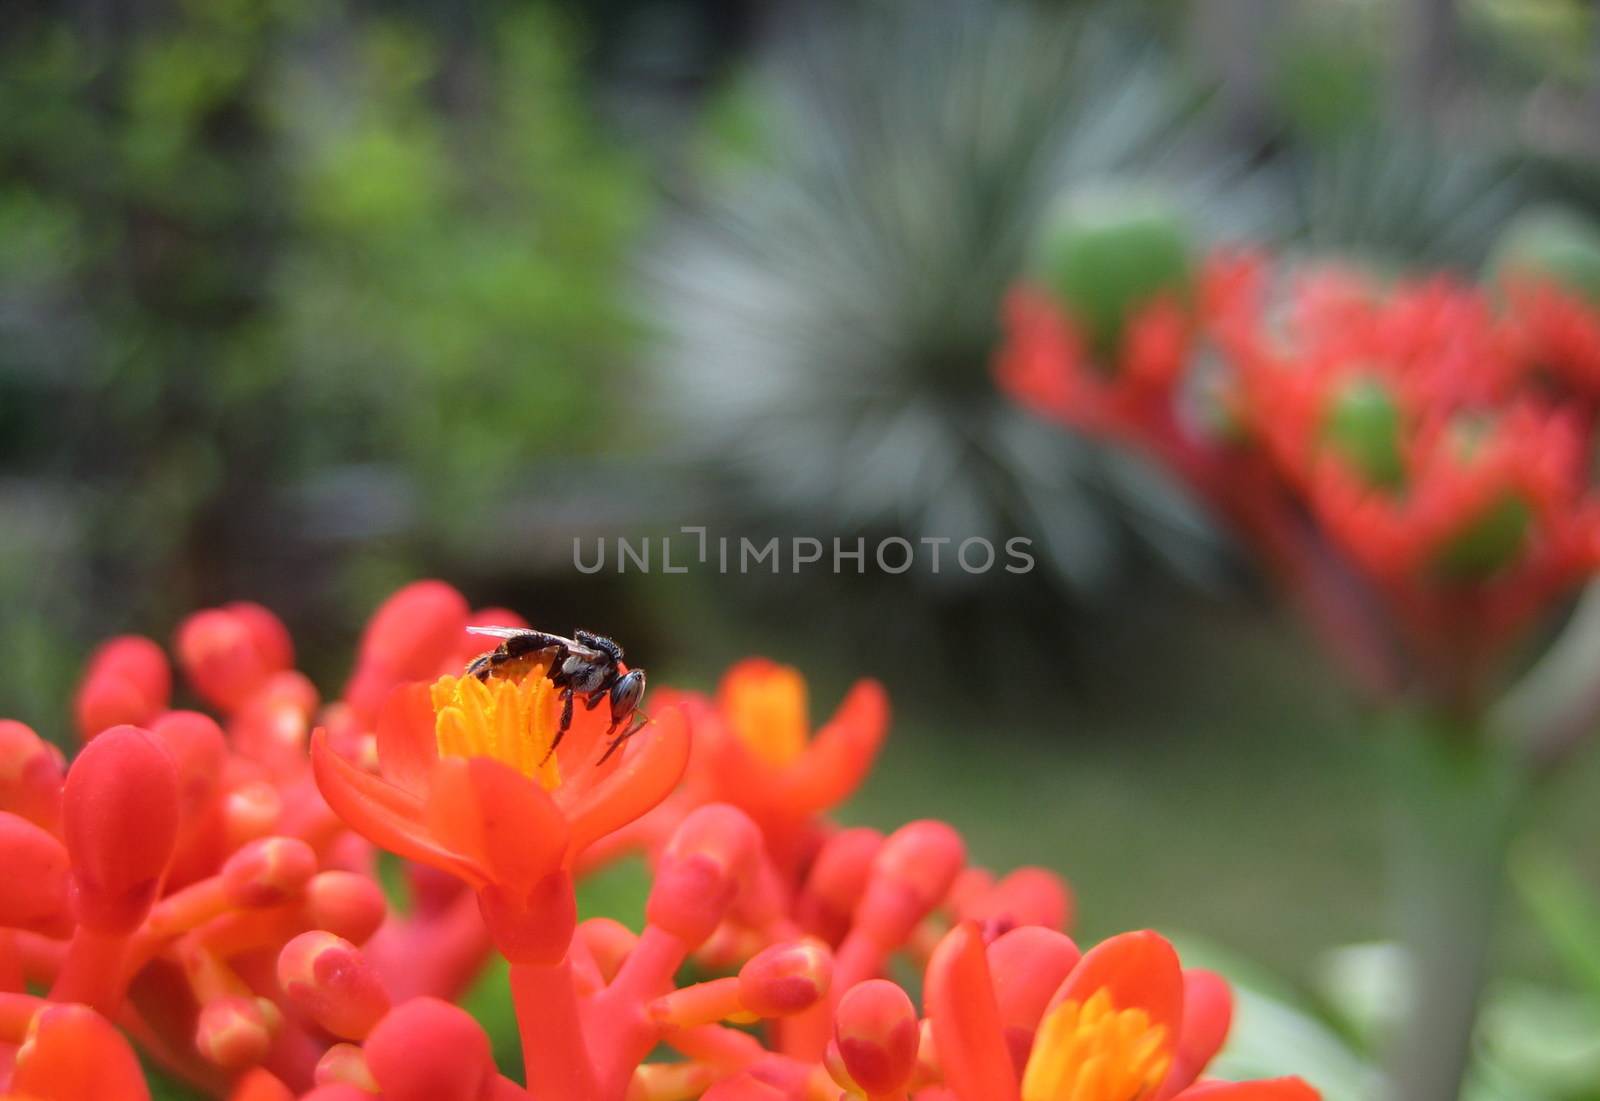 An insect on red flower in a beautiful garden by puengstock